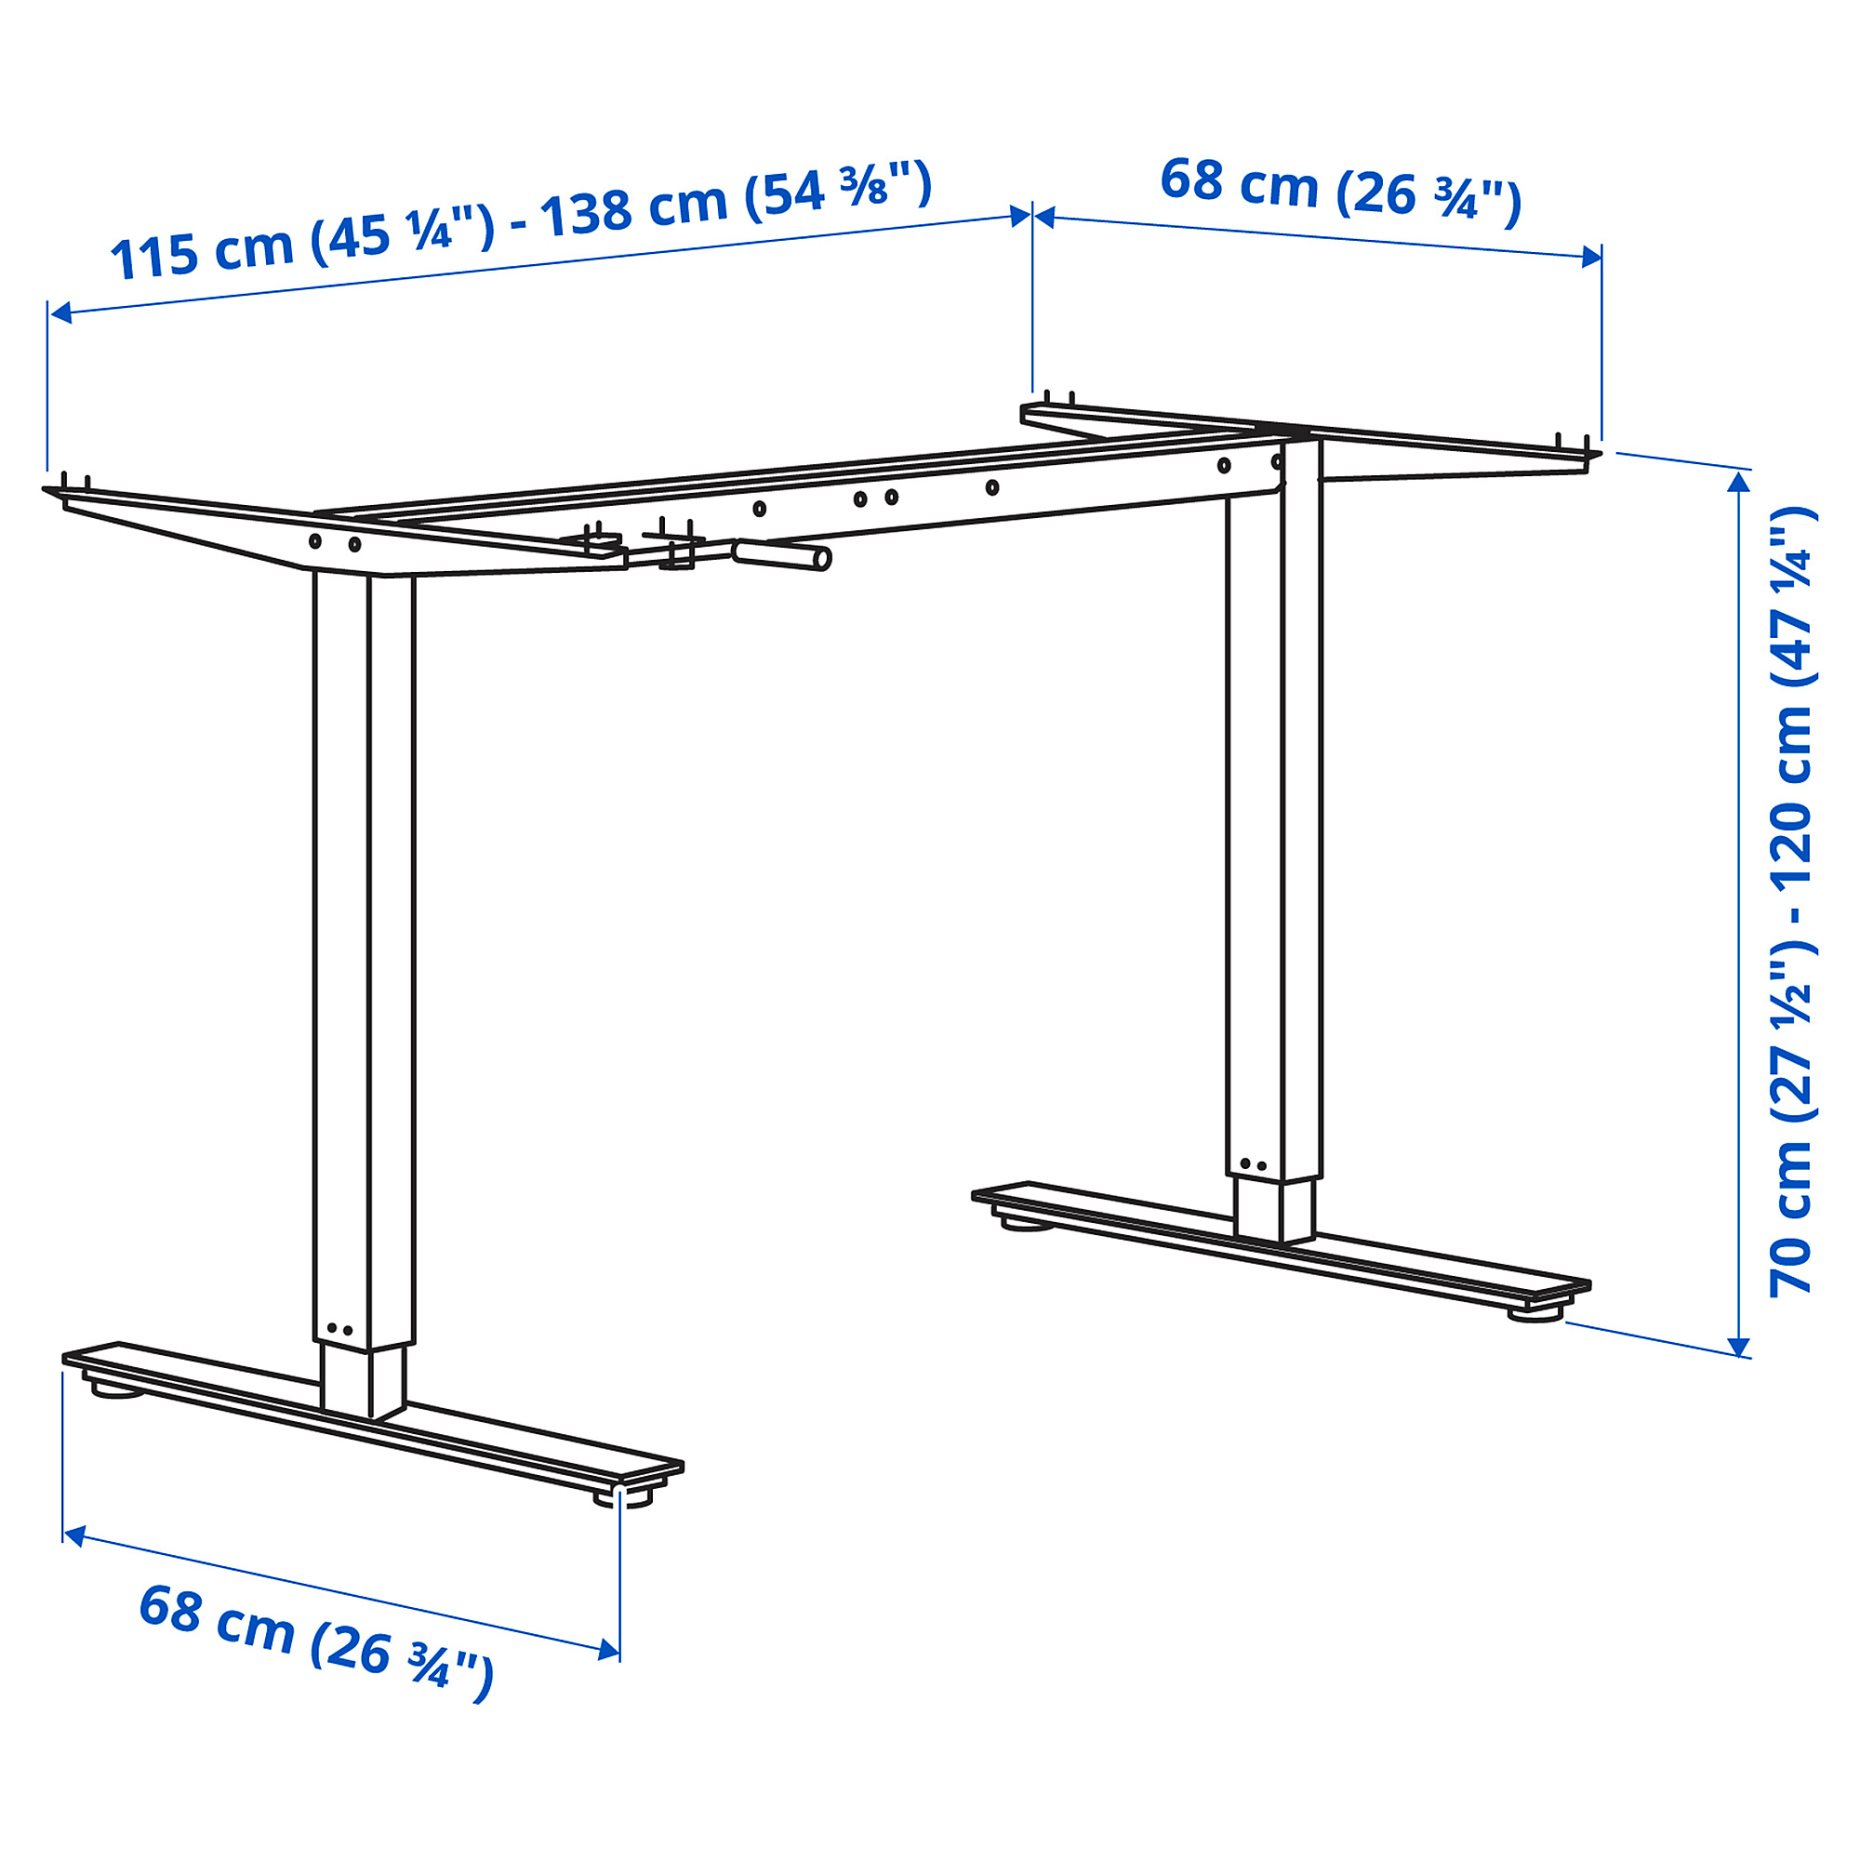 TROTTEN, underframe sit/stand for table top, 120/160 cm, 405.073.42